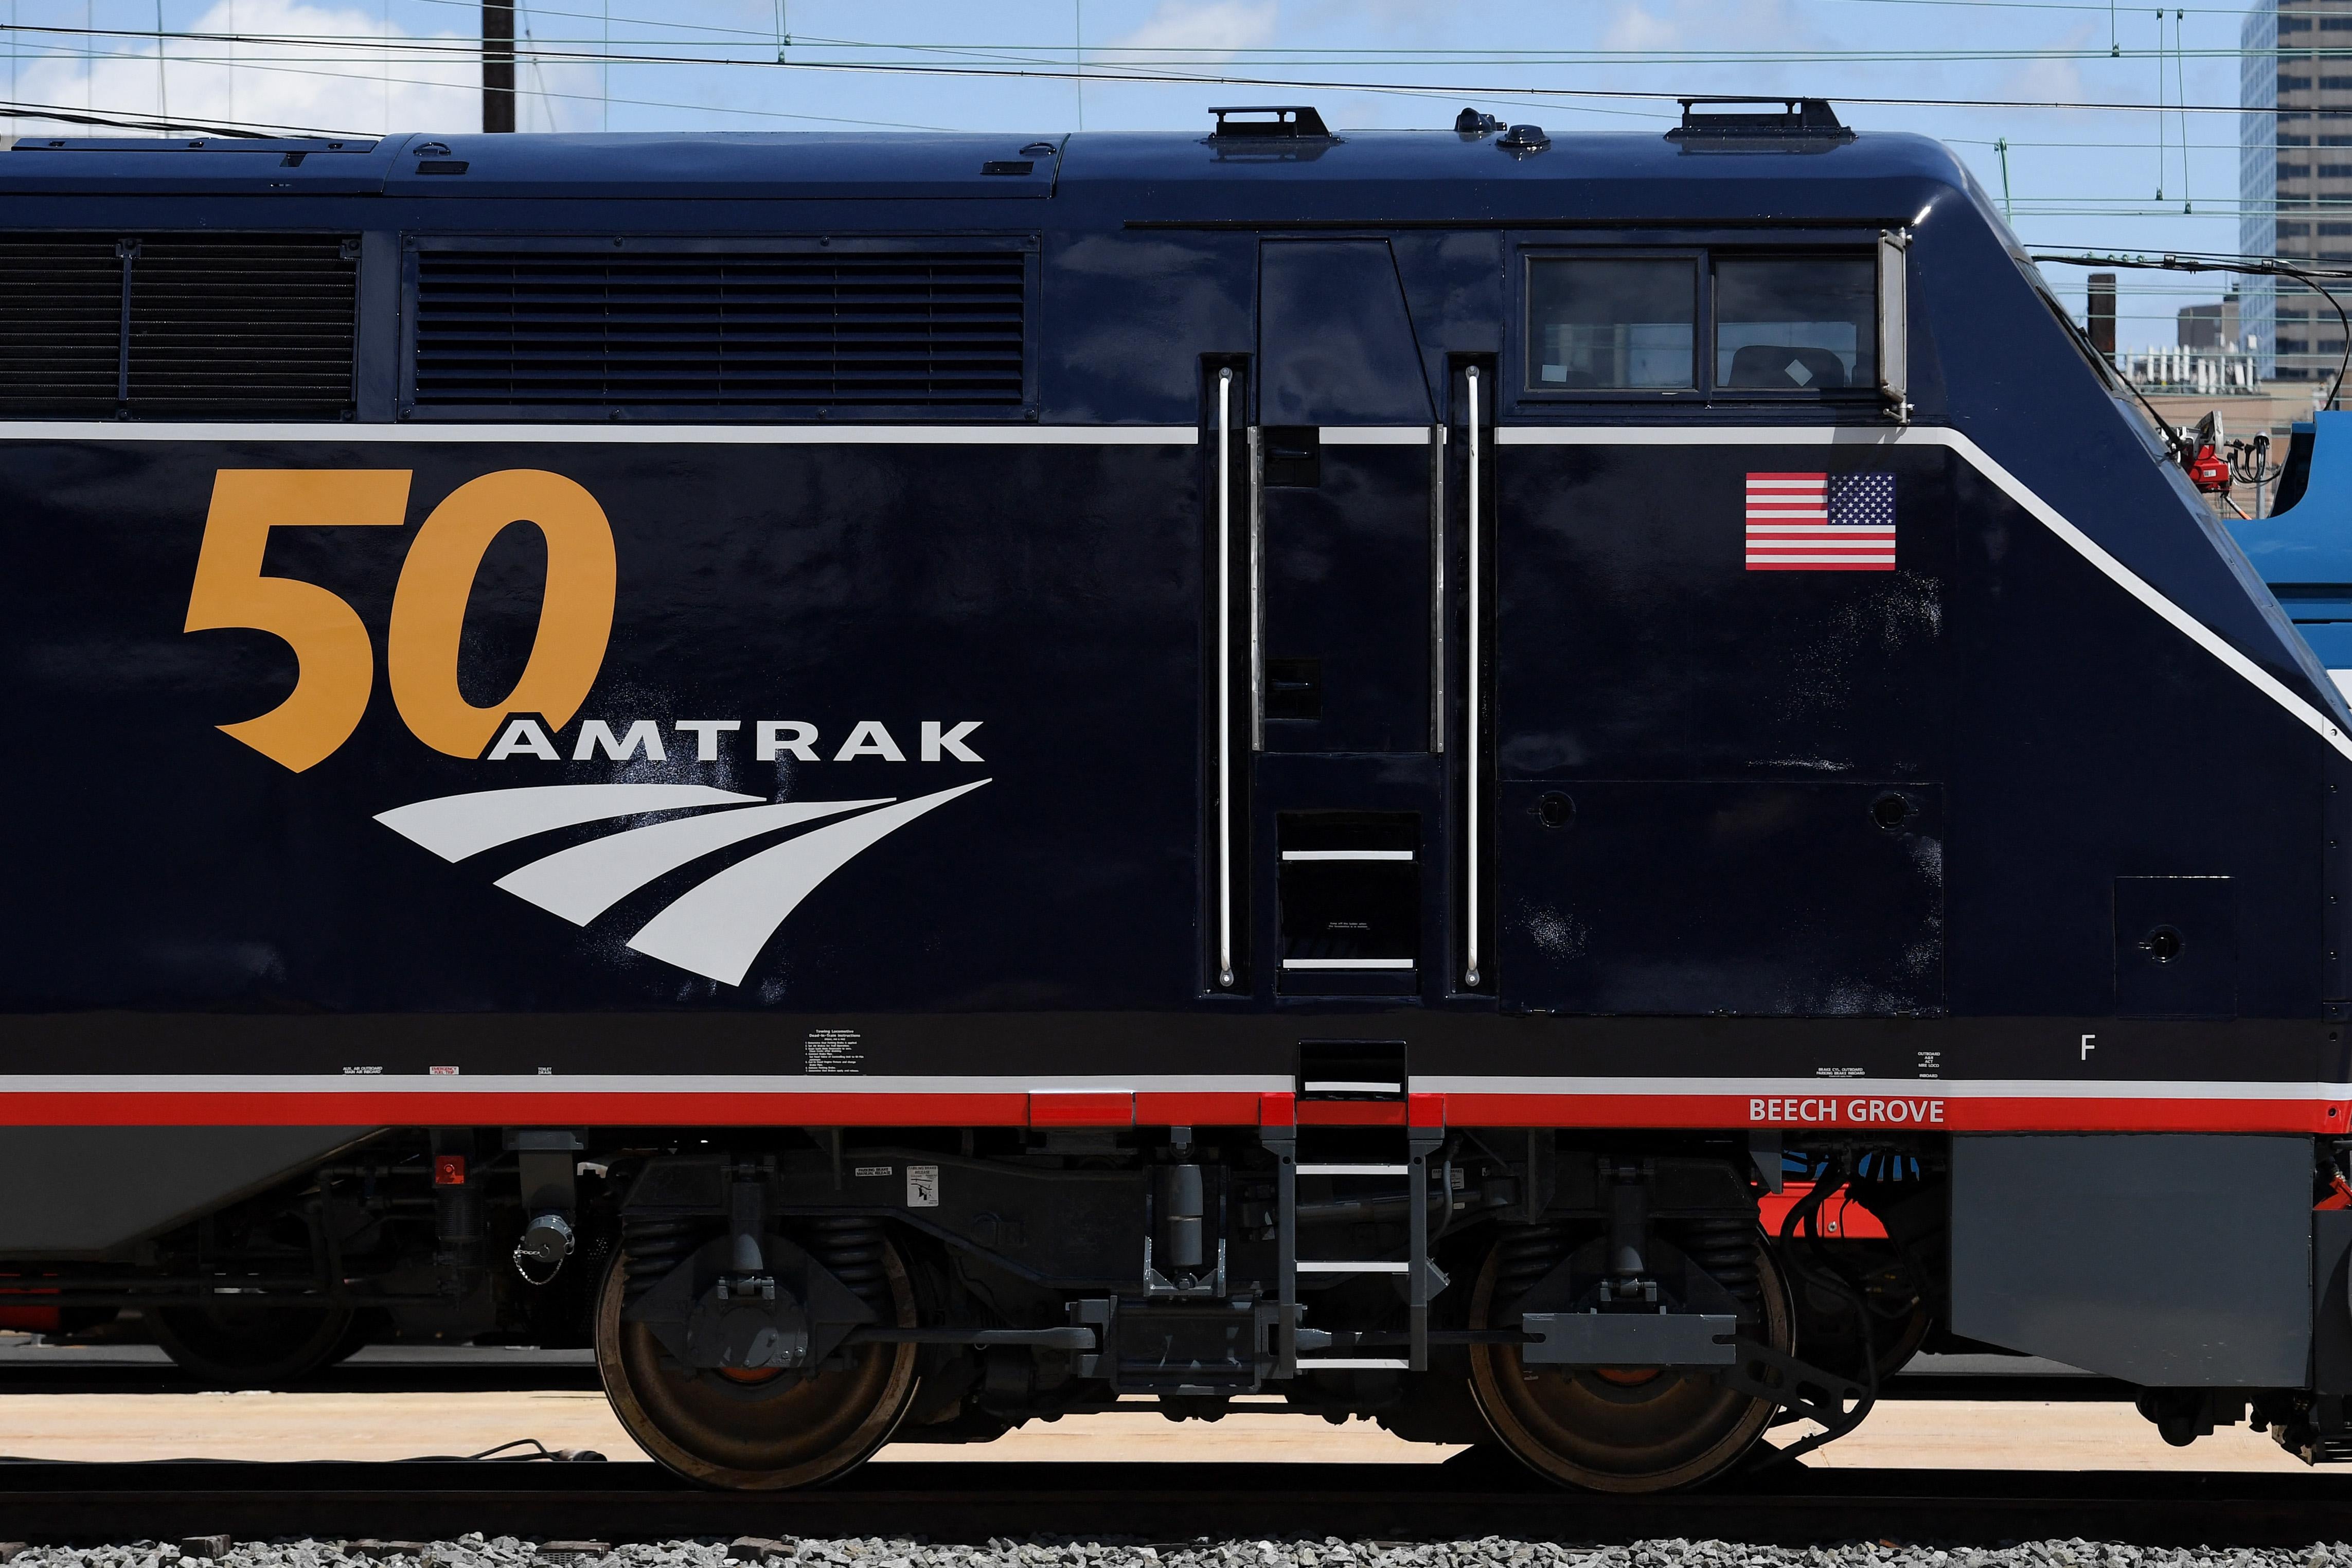 A train that reads "50 Amtrak" on its side. 